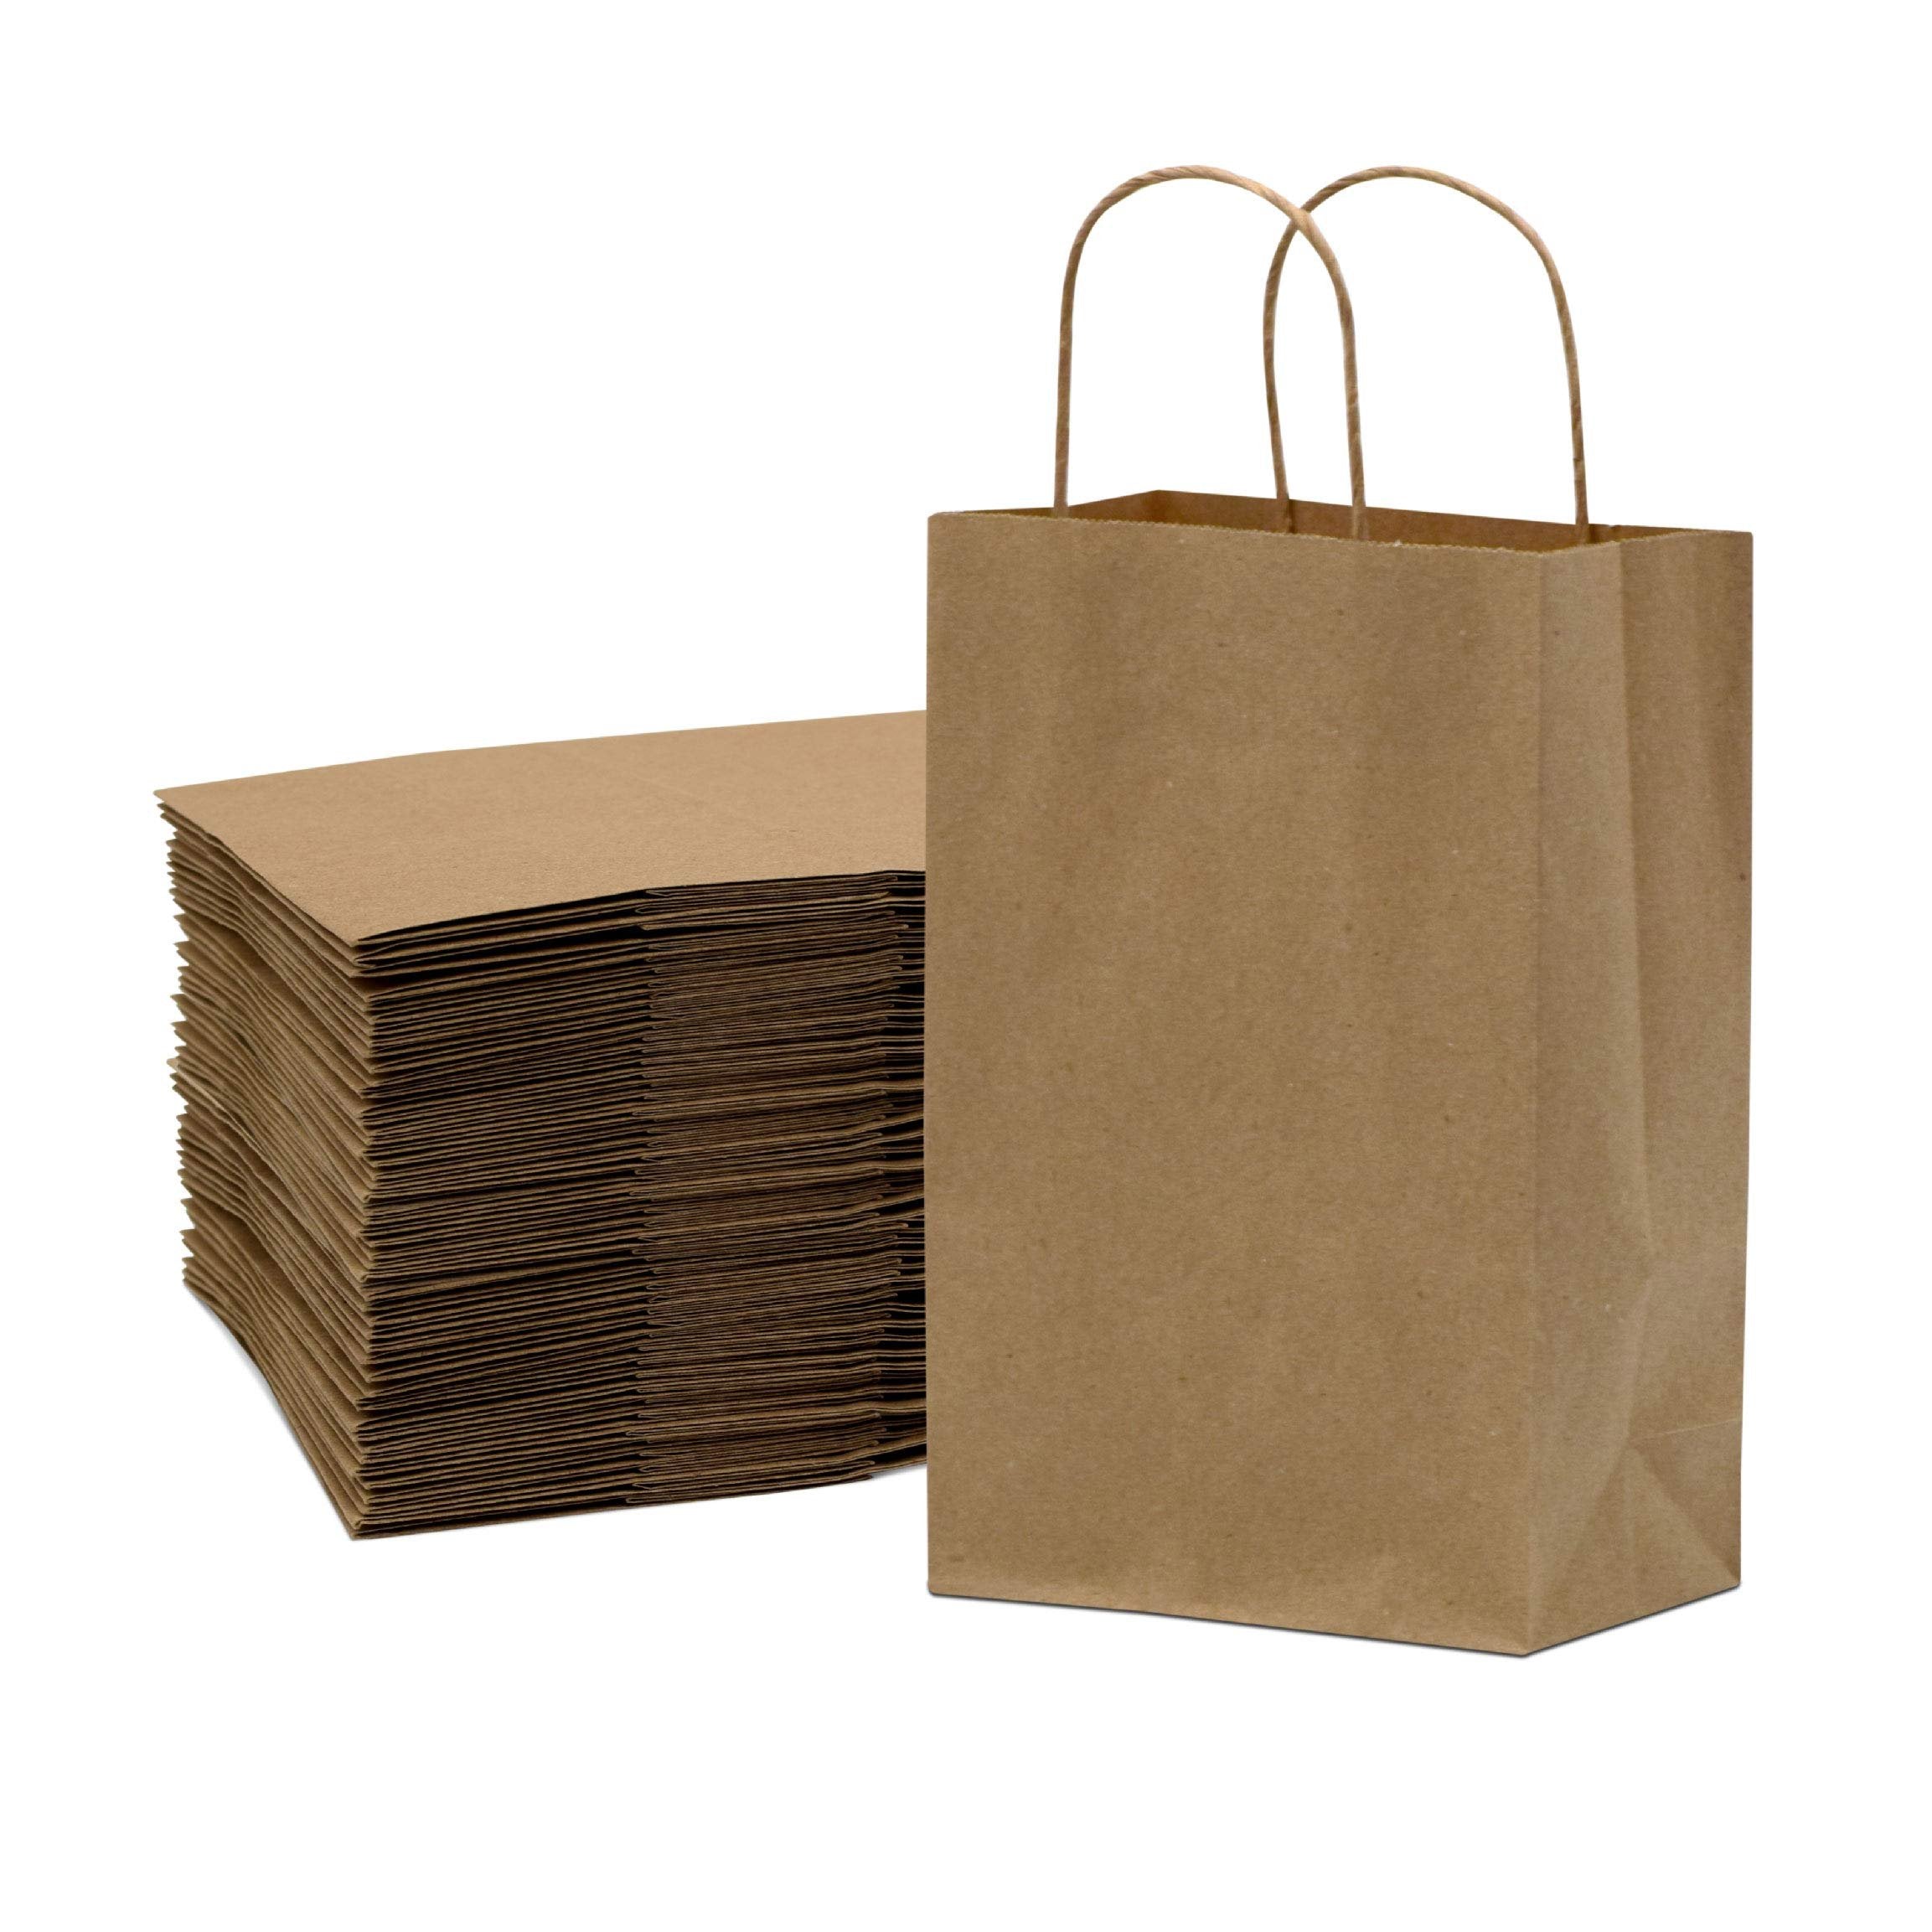 Prime Line Packaging Brown Paper Bags with Handles - 6x3x9 Inch (100 Pack) for Boutique, Gifts, Retail, Take Out